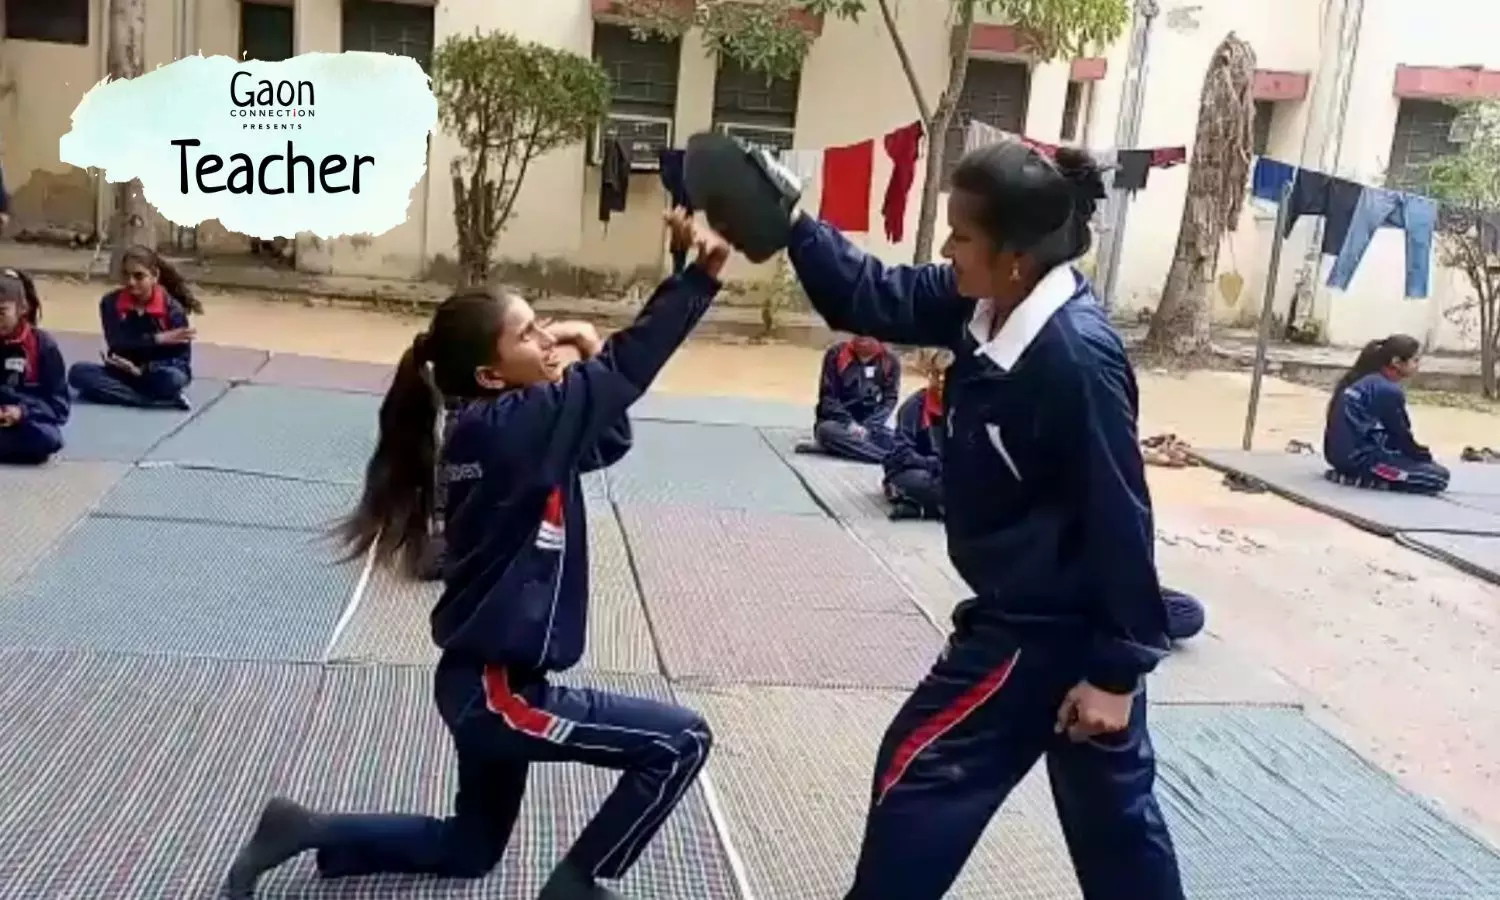 A teacher has trained over 30,000 girls in self-defence